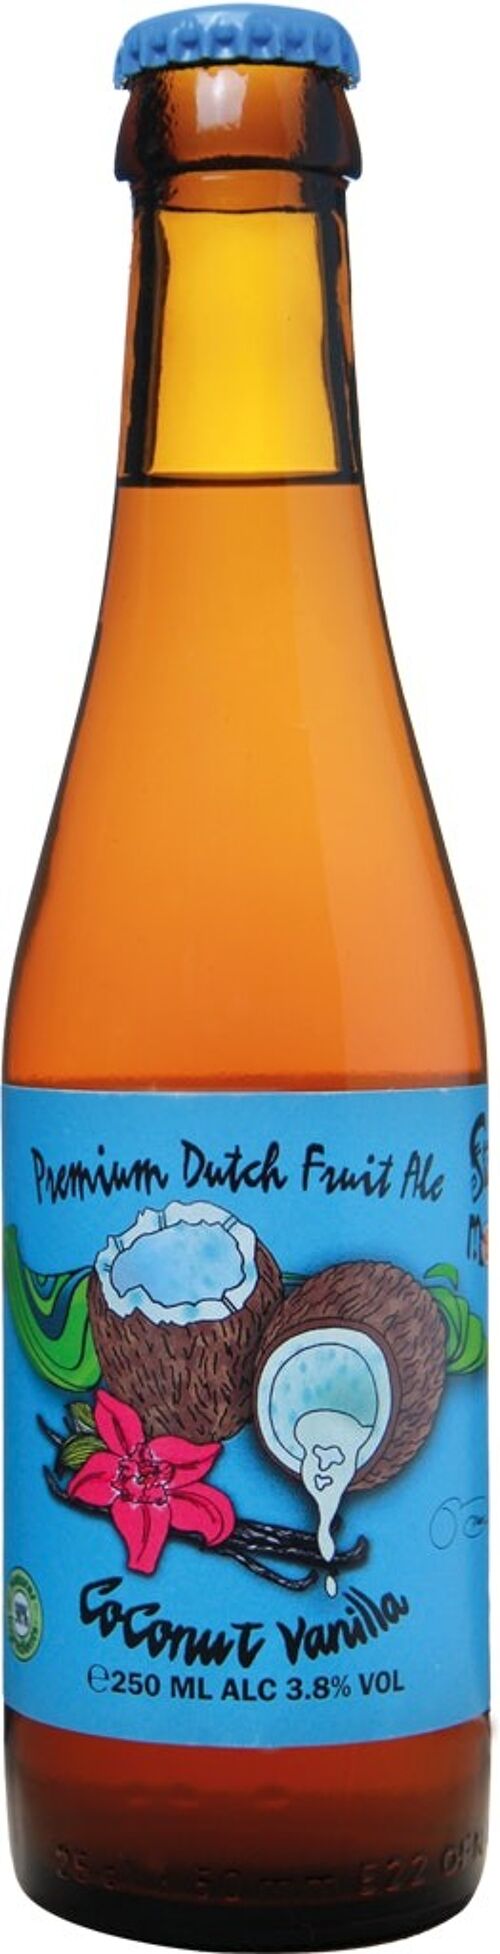 Fruit Beer for Valentine's Day, Easter, Spring or Summer! Coconut Vanilla — 24 x 250 ml